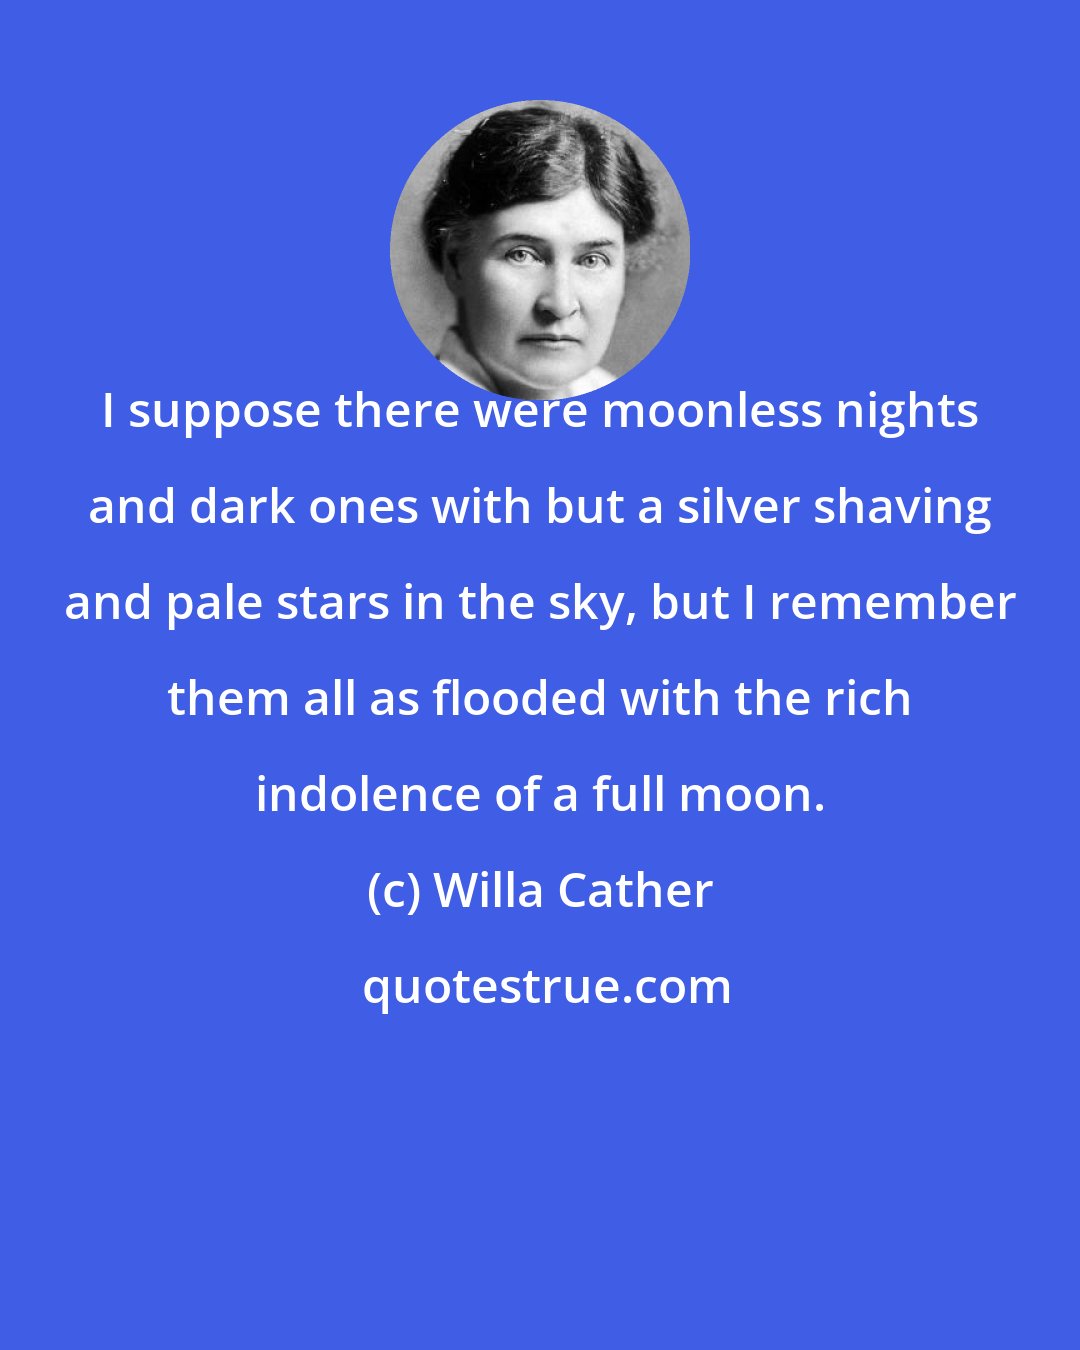 Willa Cather: I suppose there were moonless nights and dark ones with but a silver shaving and pale stars in the sky, but I remember them all as flooded with the rich indolence of a full moon.